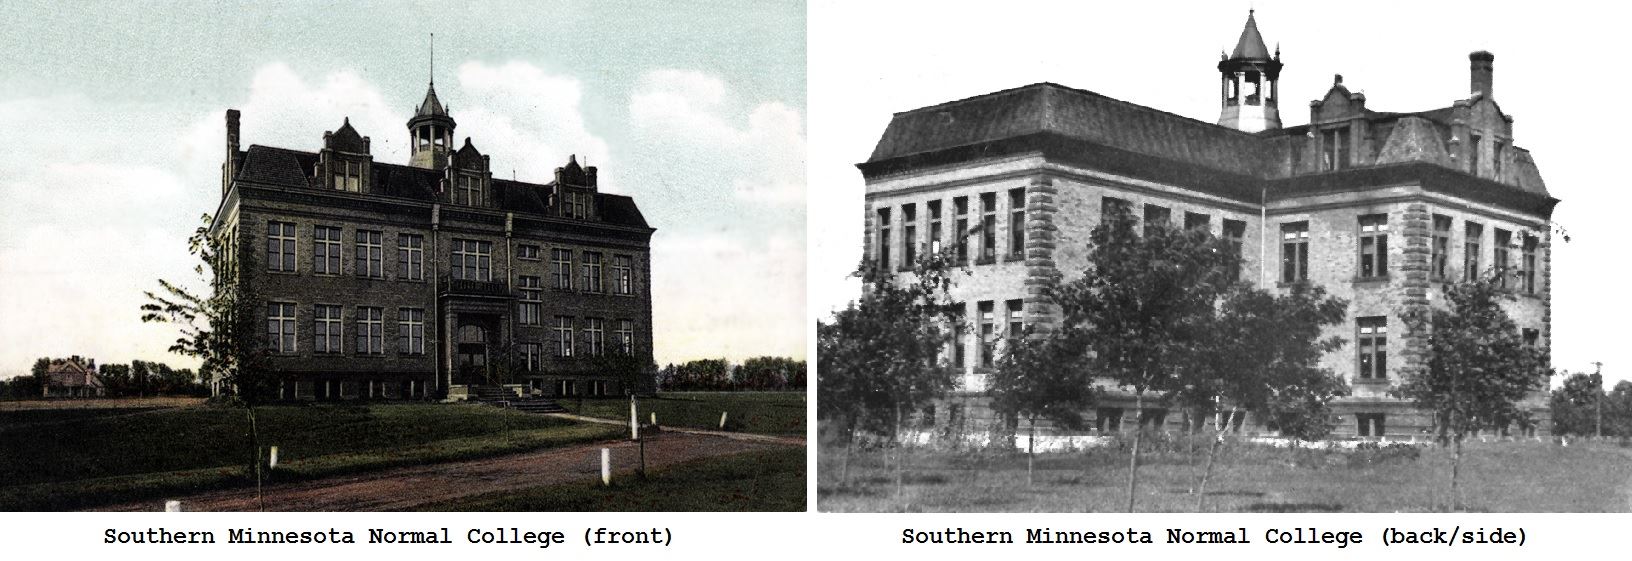 Southern Minnesota Normal College (was located on the south side of Galloway Park) Austin, Mn